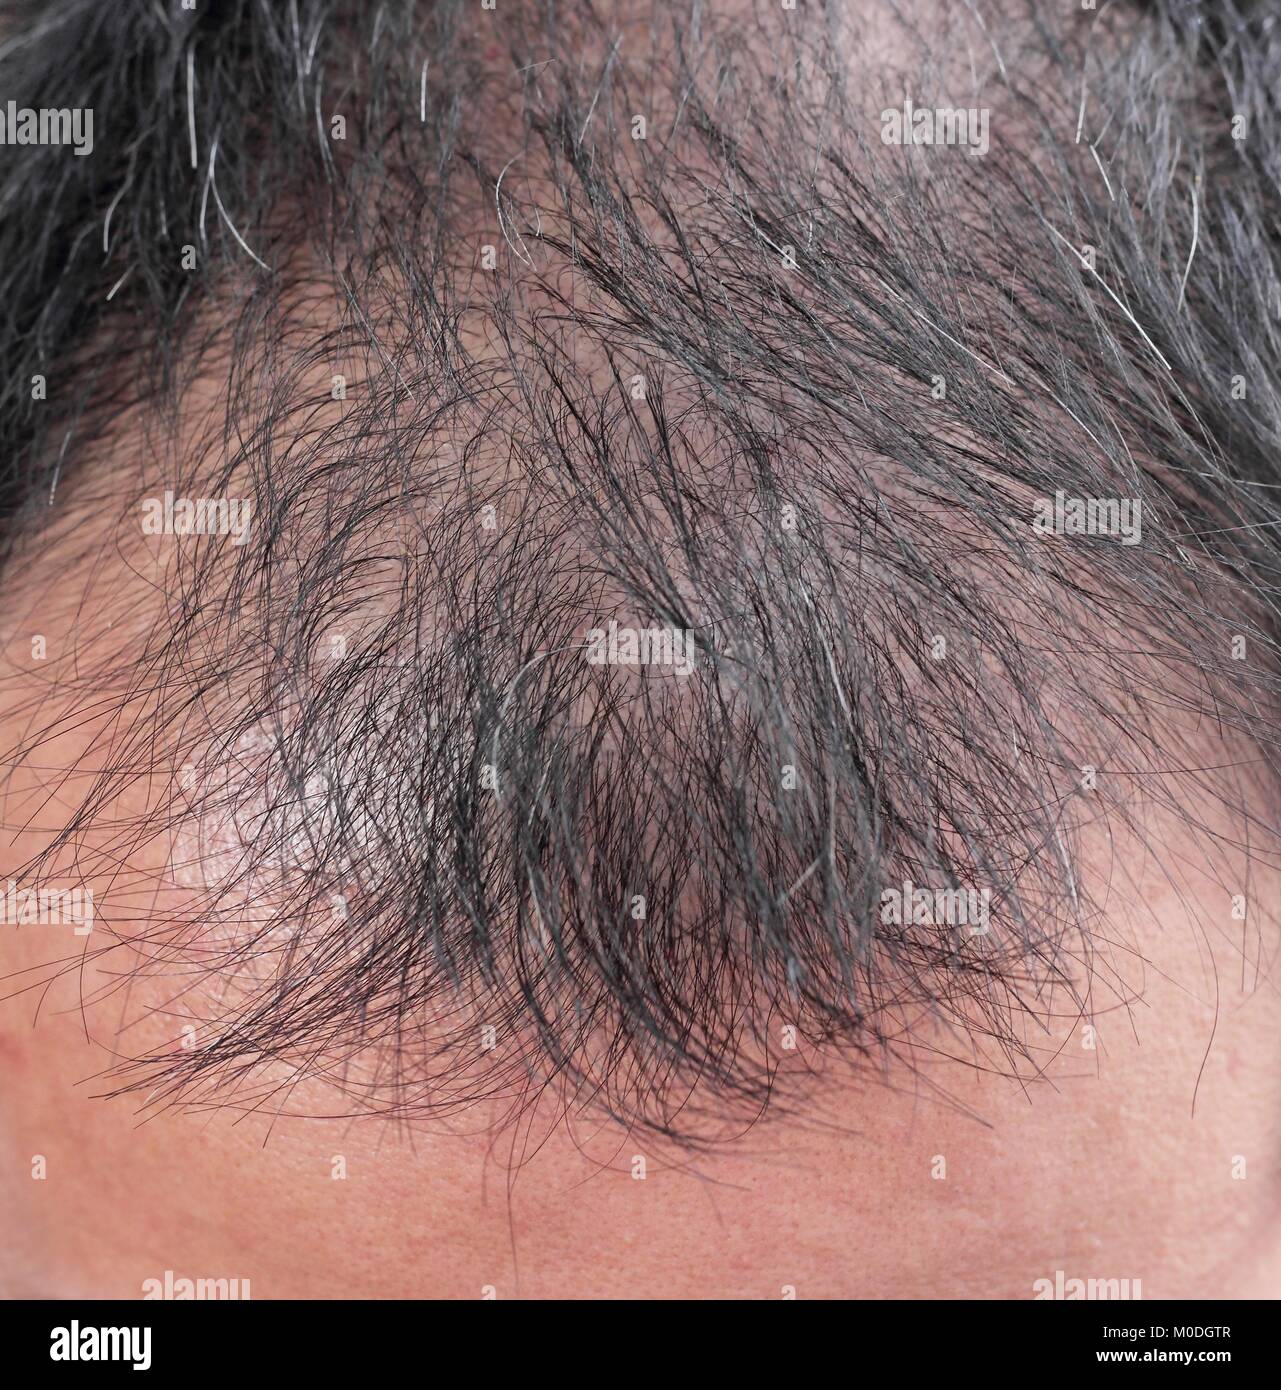 Point of focus lose one's hair glabrous baldy loss hairline men. Stock Photo